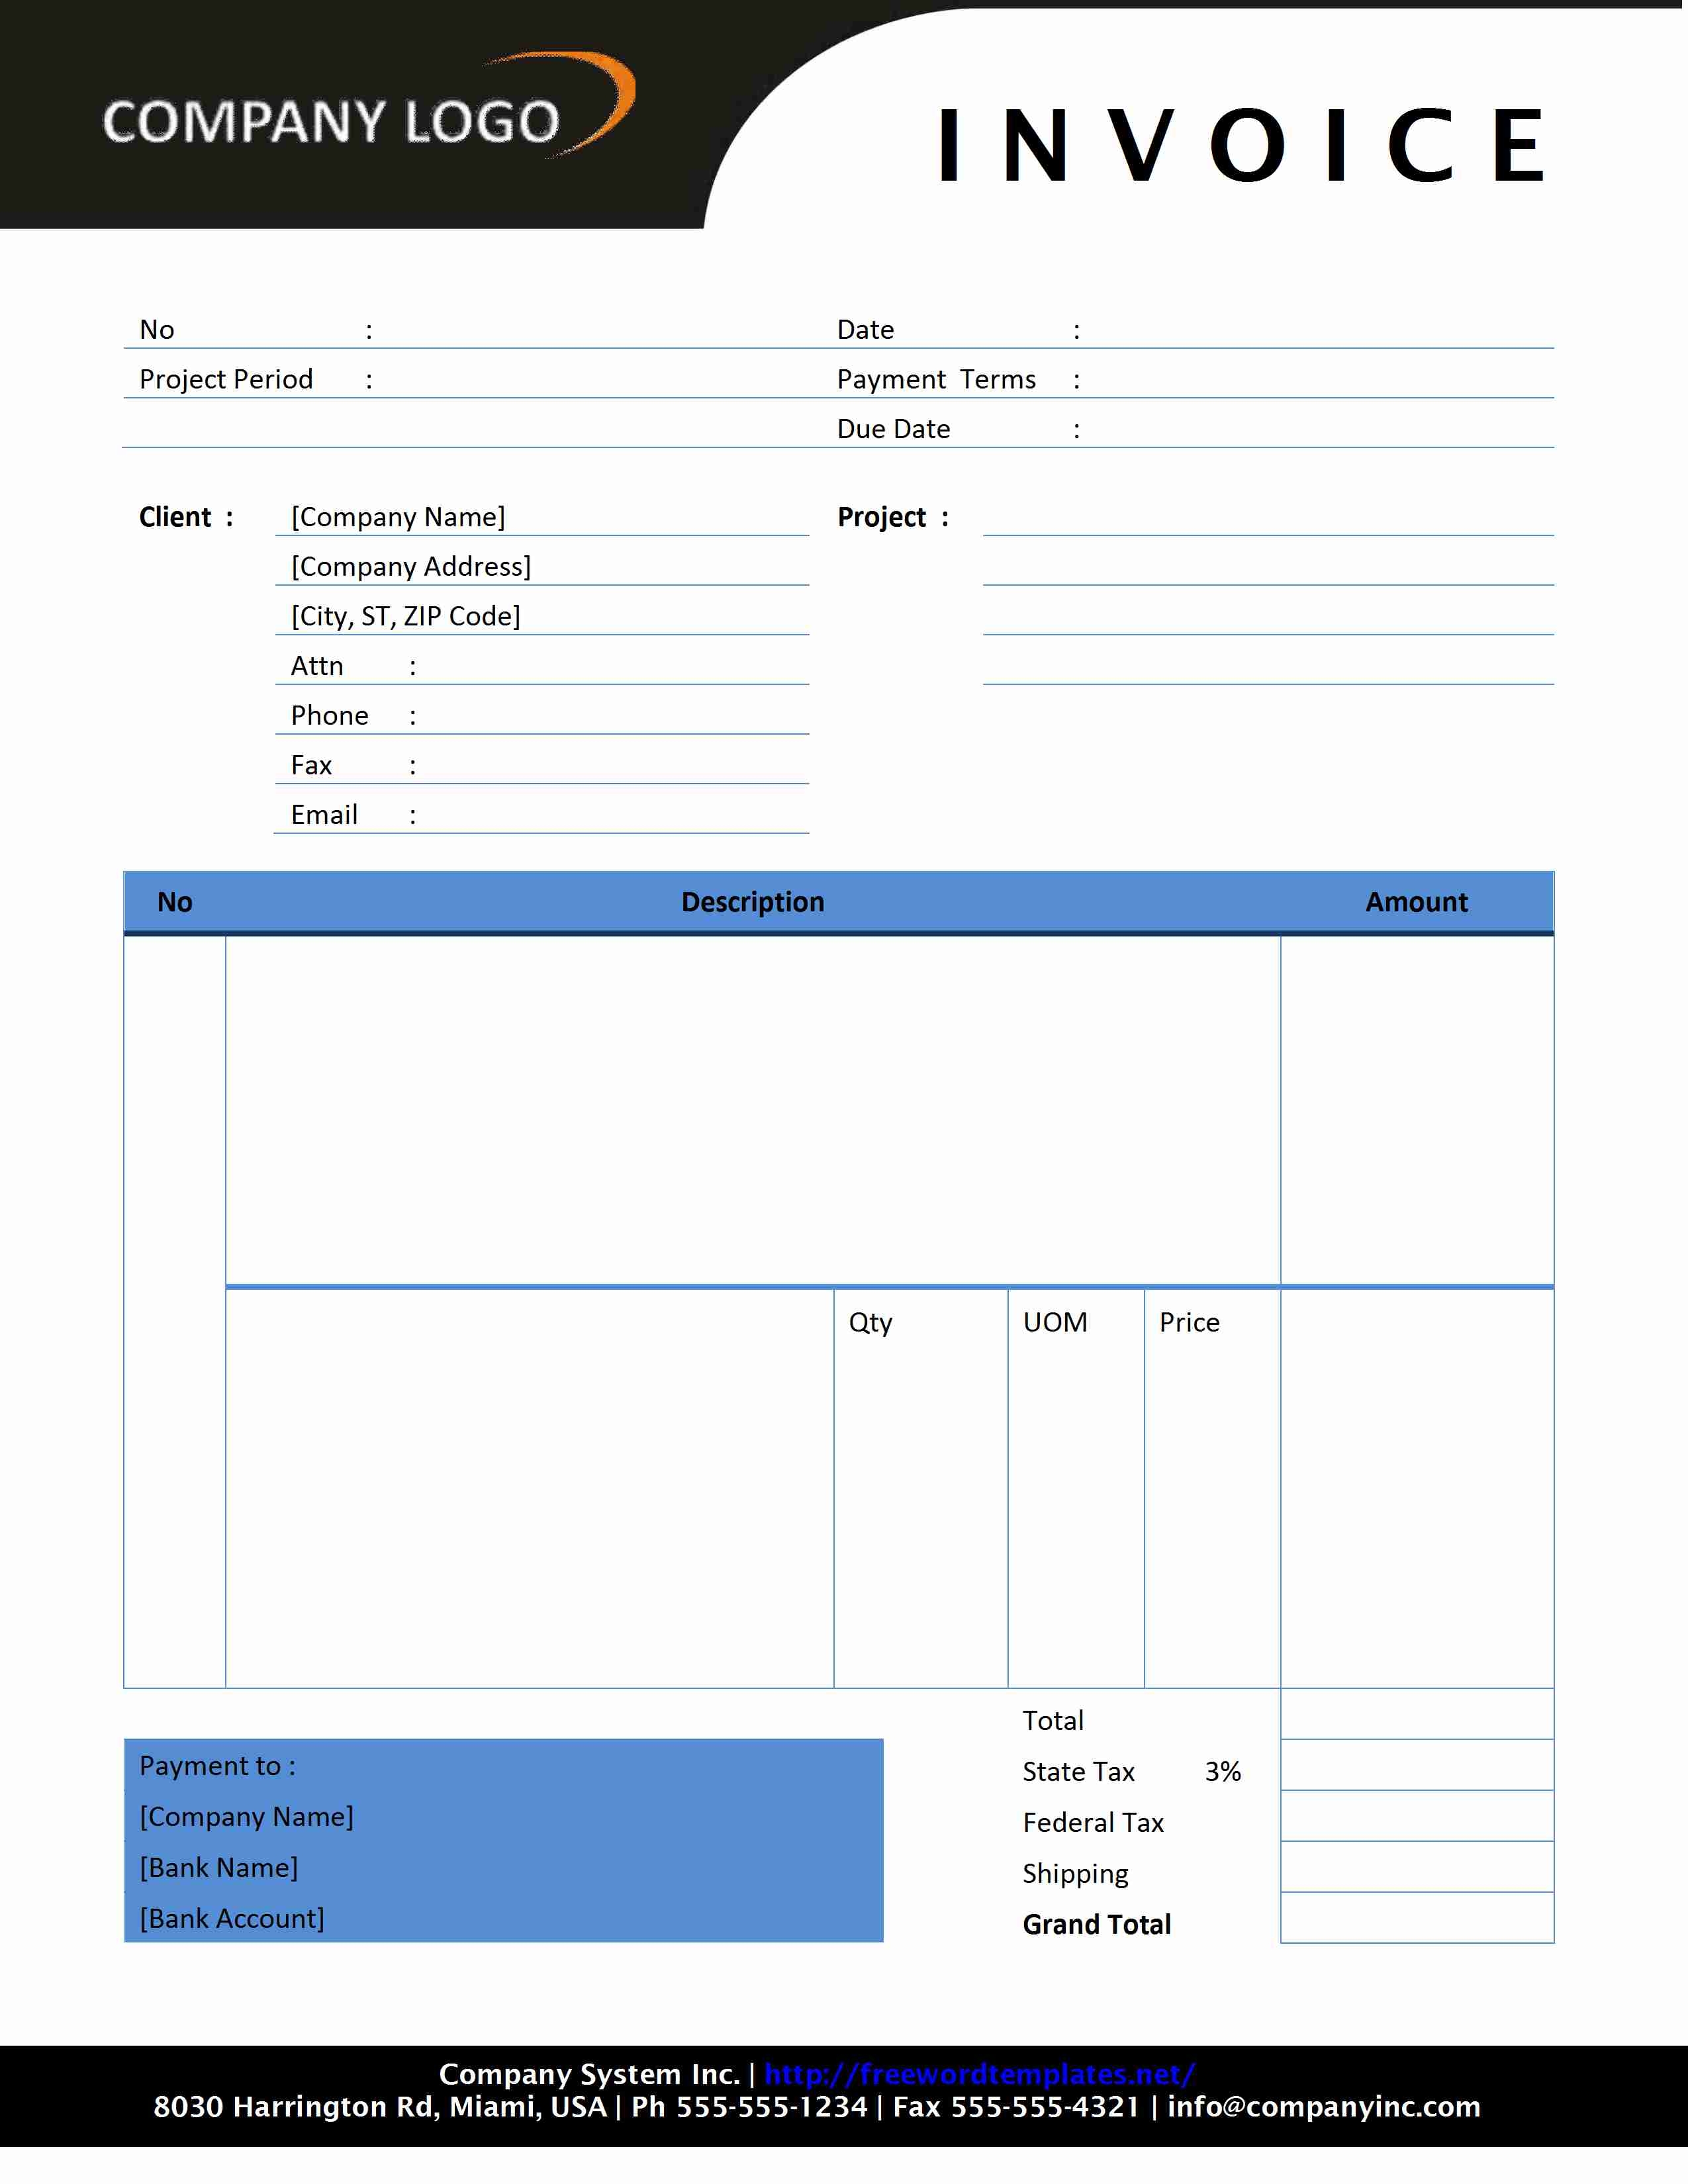 invoice templates Microsoft Word or Excel